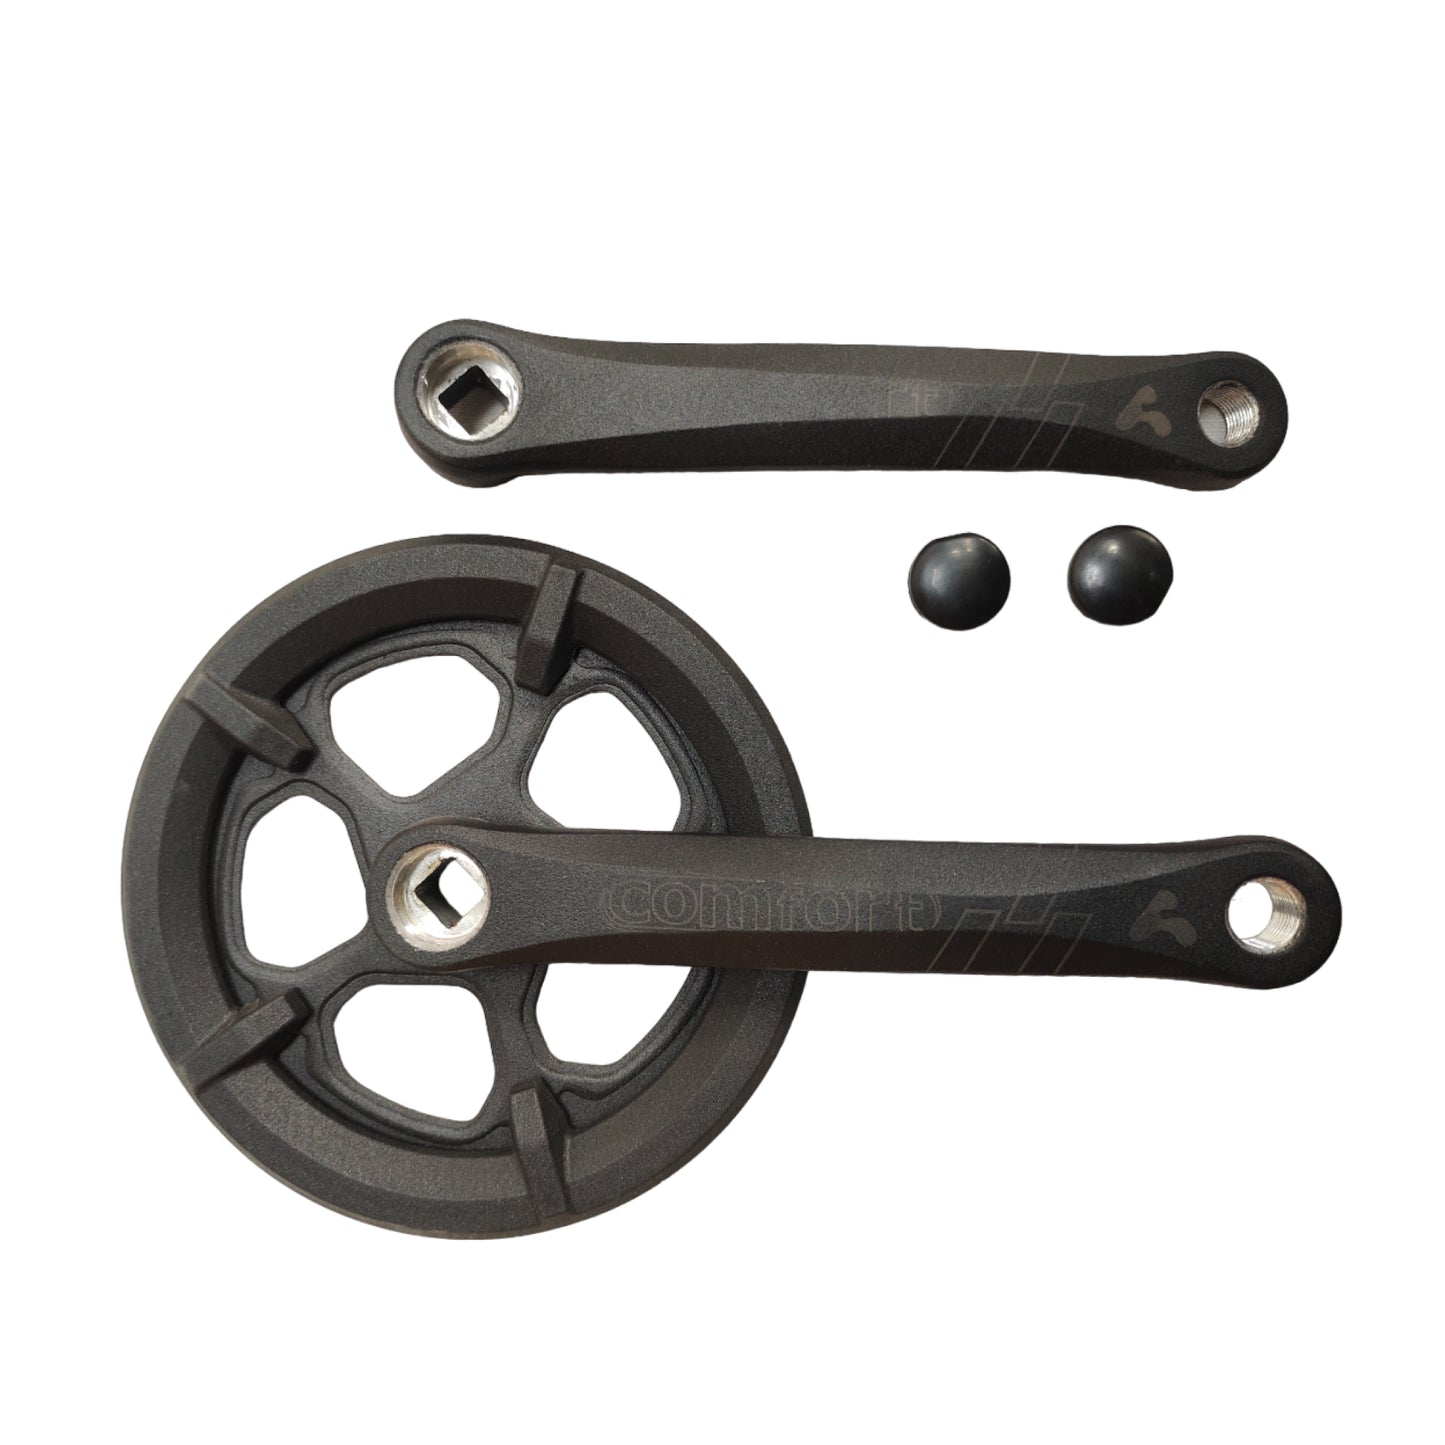 Bicycle crankset alloy single speed top full view by omobikes